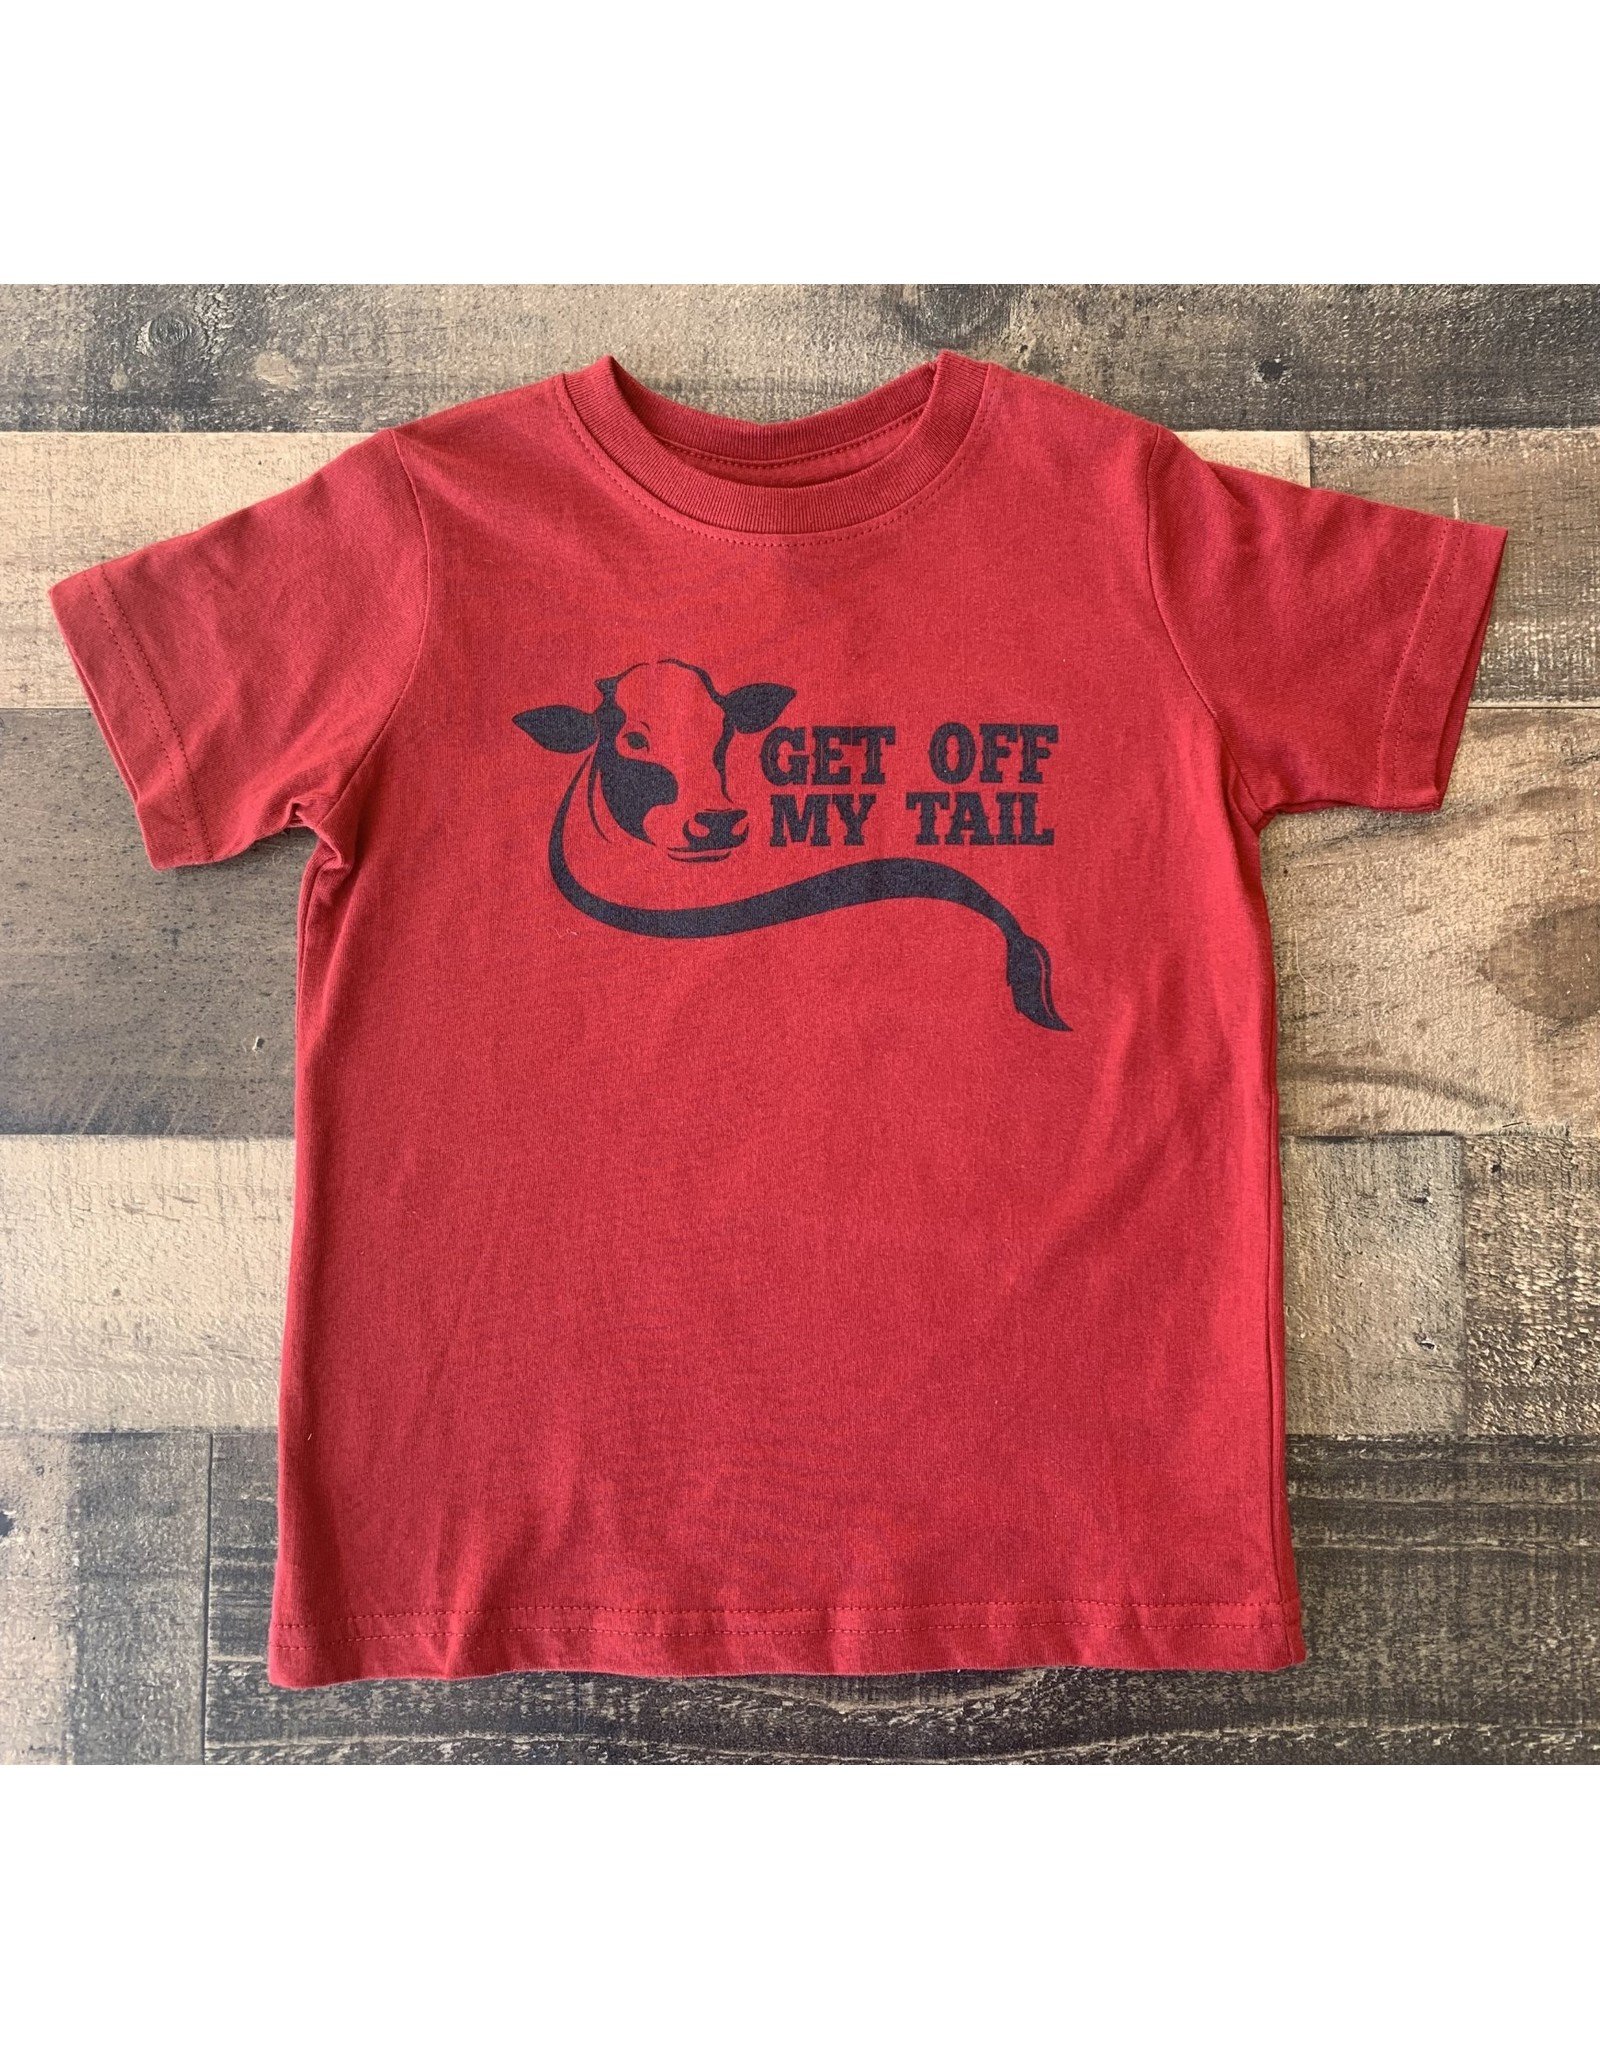 Get off My Tail Shirt: Red